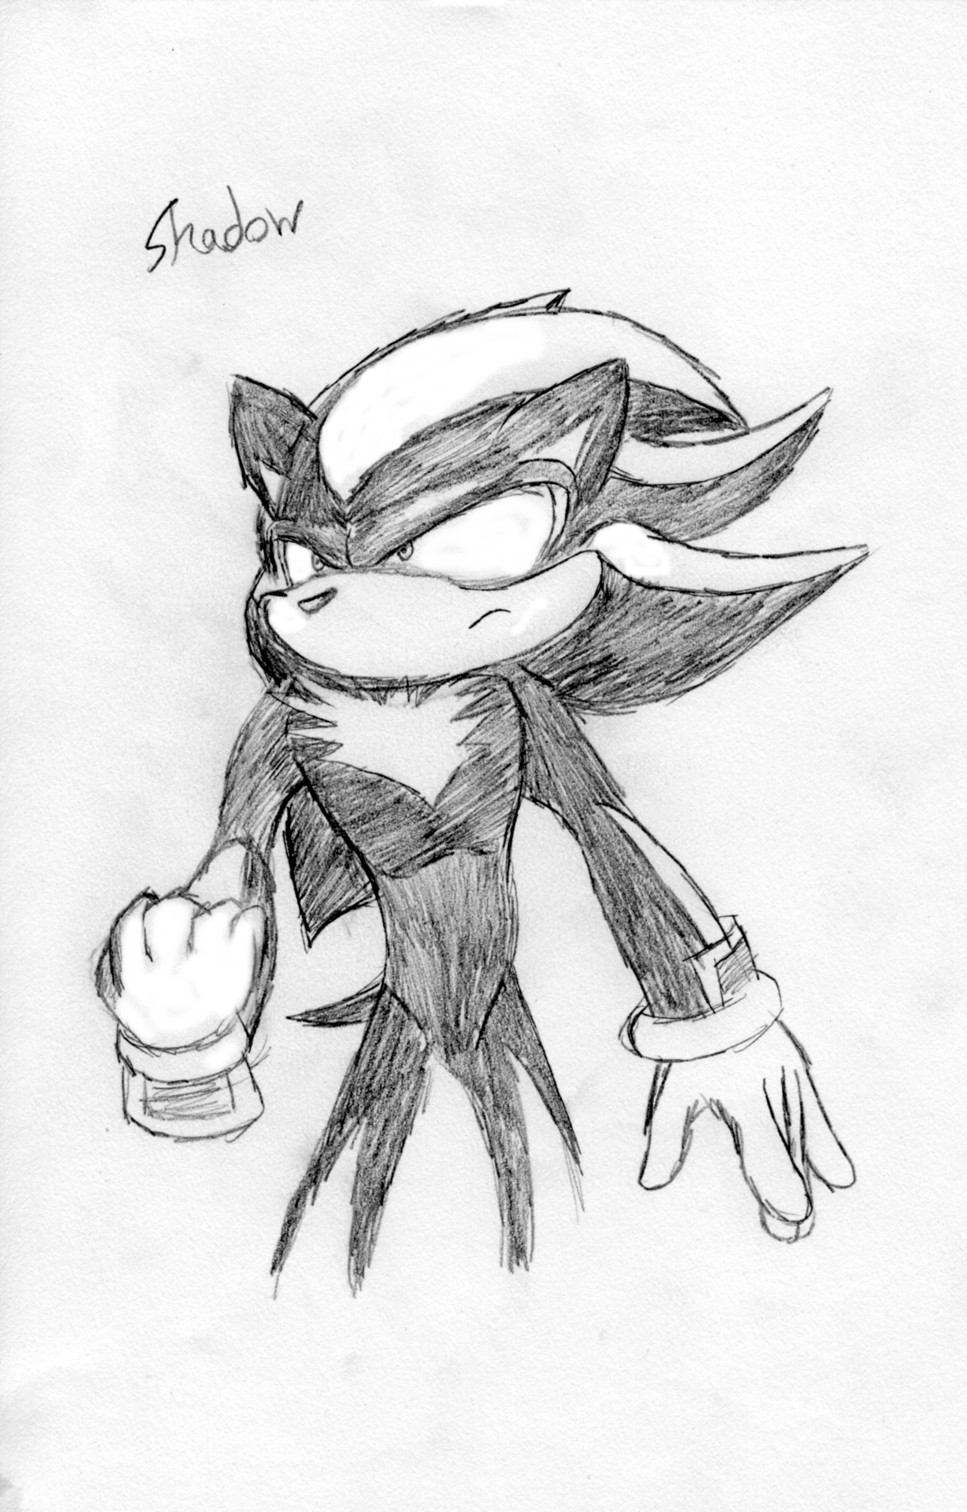 The Best Shadow I Ever Drew Ever by TheGameArtCritic